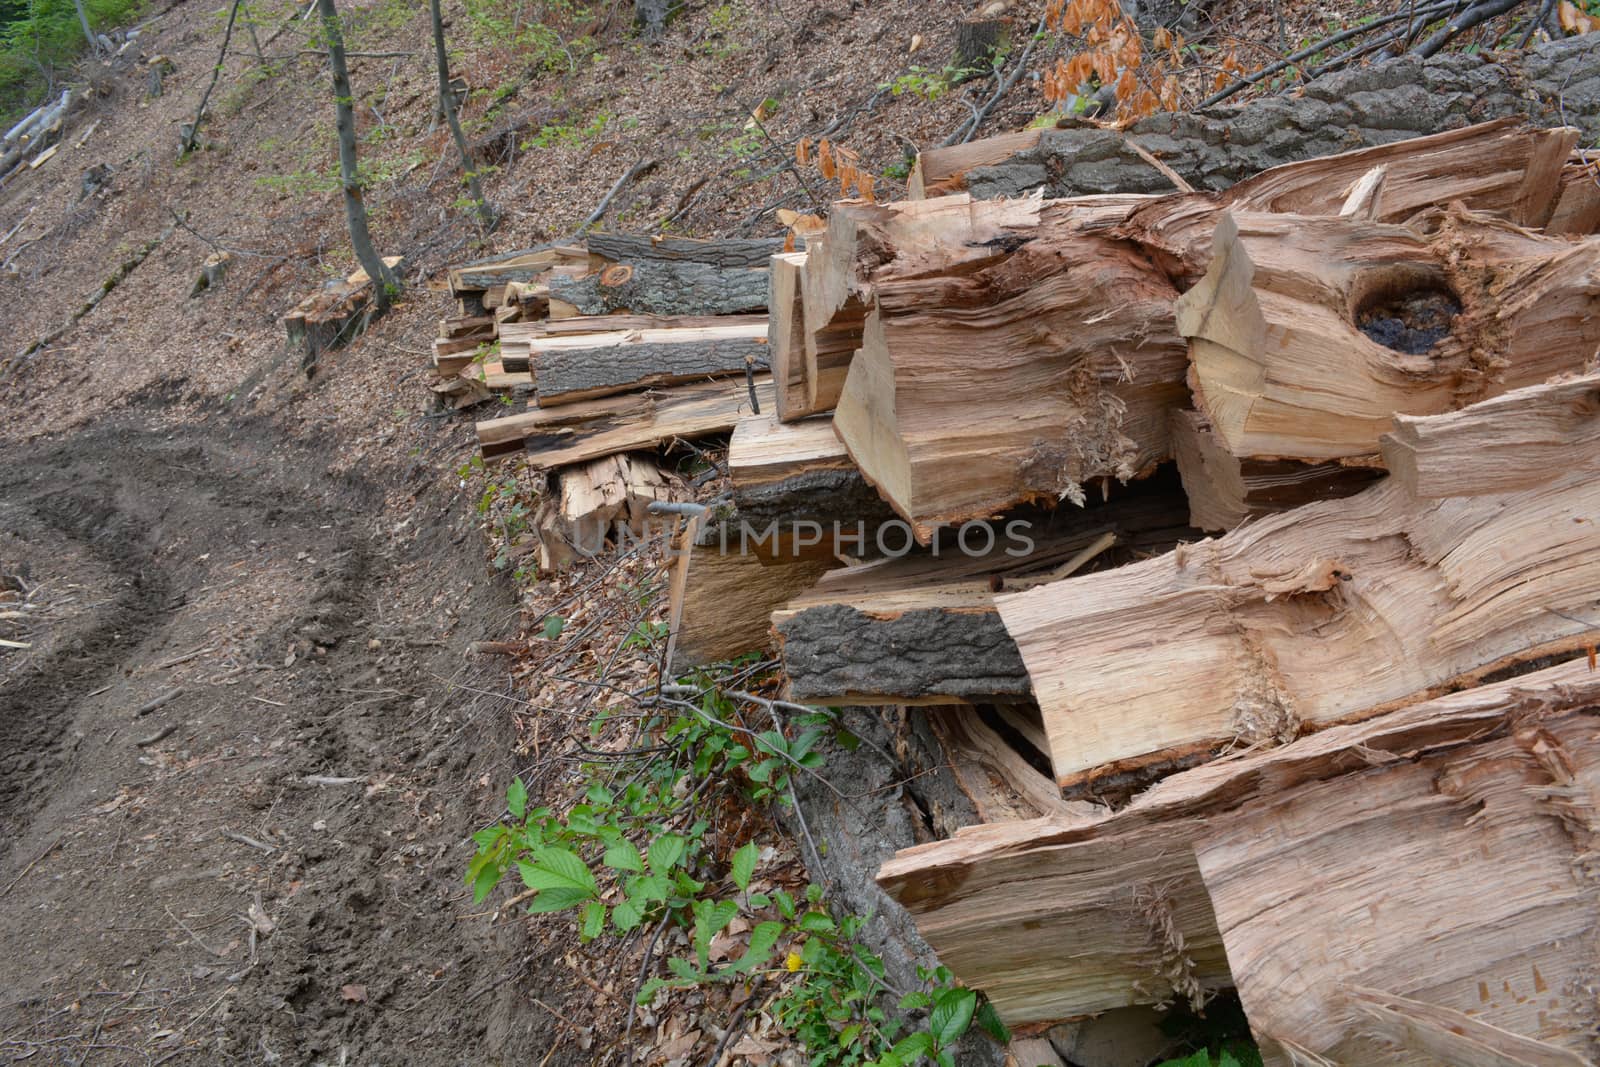 Logs near road ready to be transported